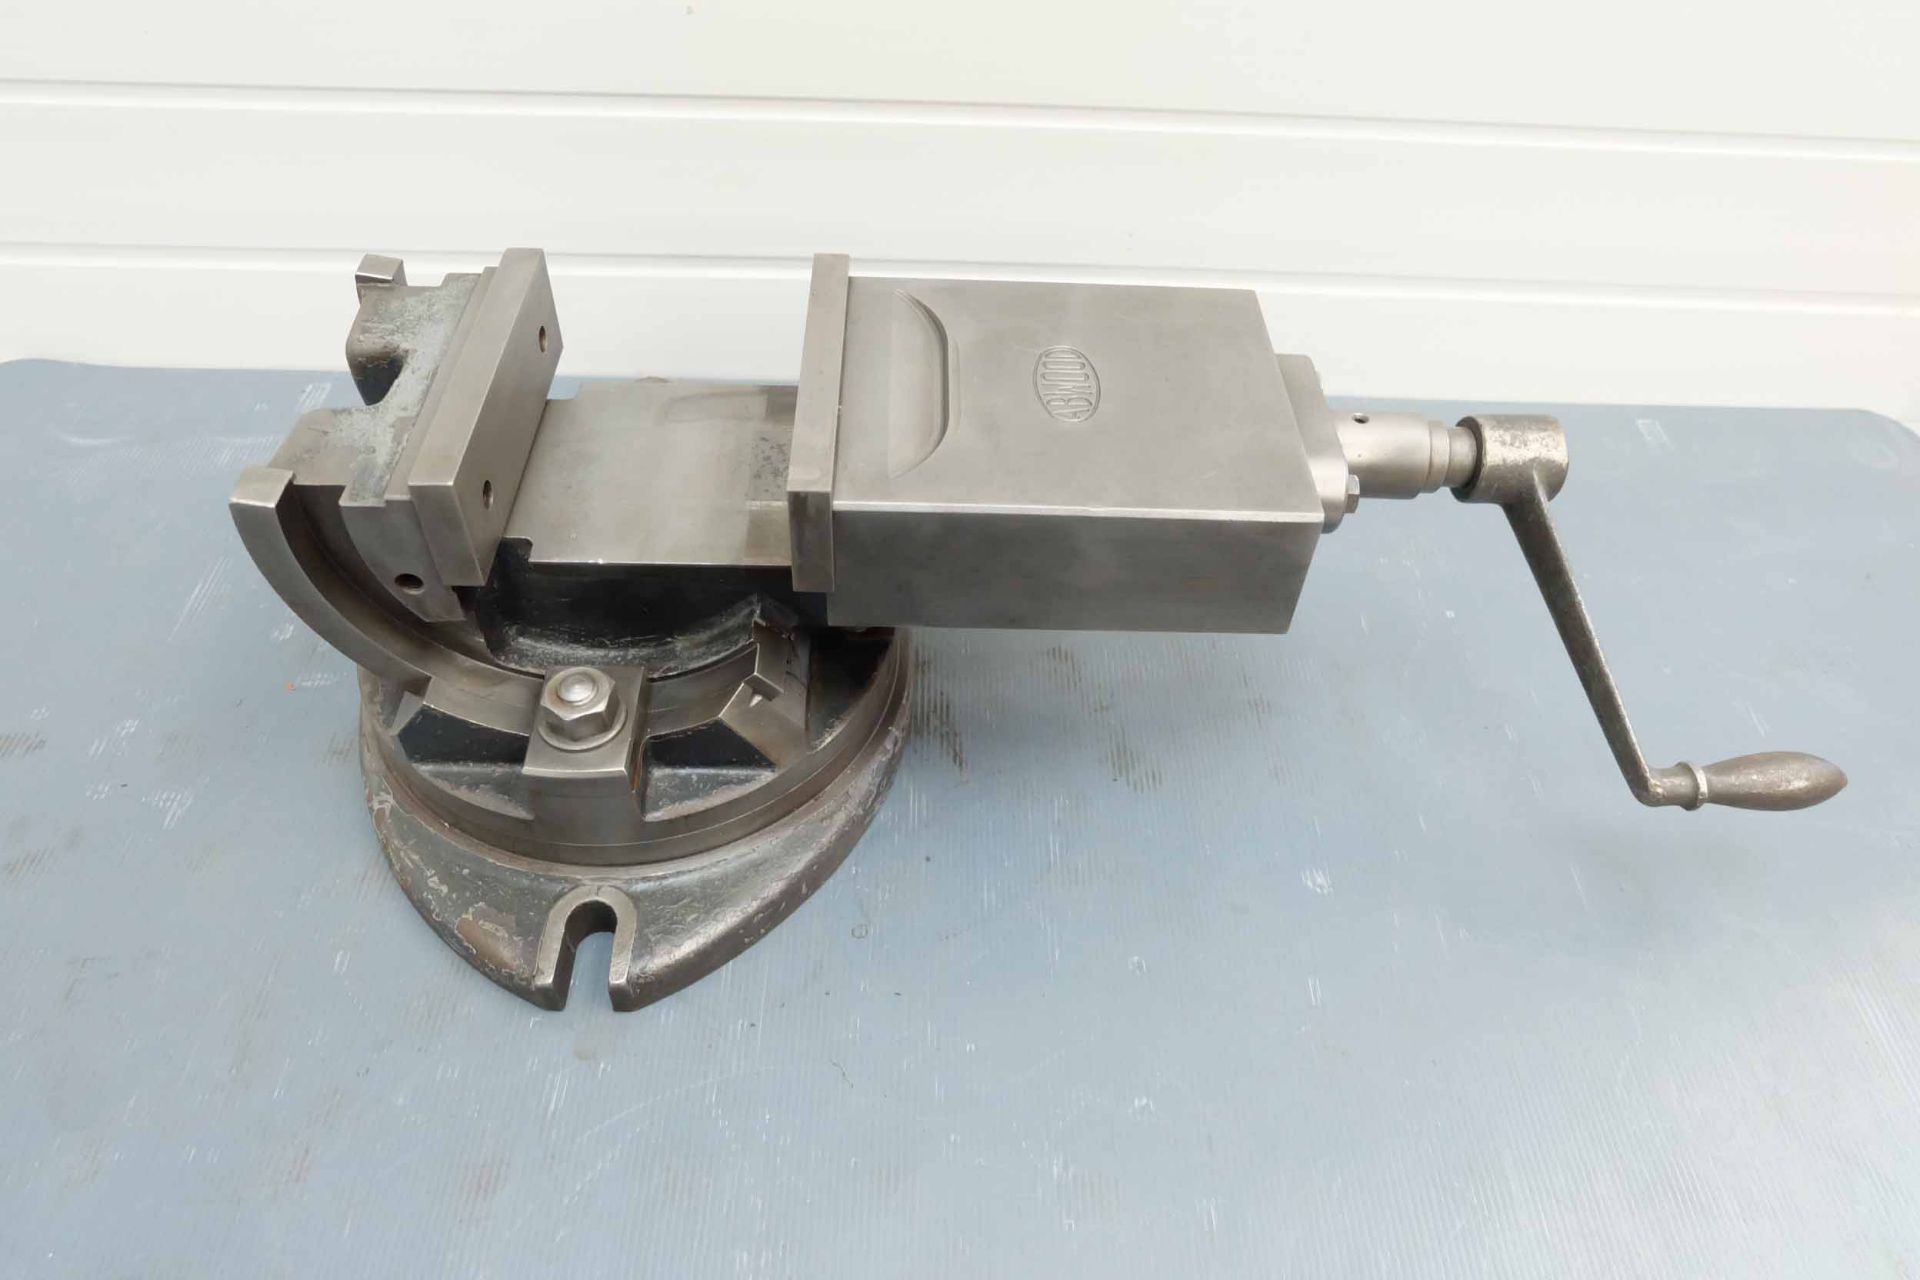 Abwood Tilting/Swivelling Vice. Jaw Width 6 1/8". Jaw Height 2 1/8". Max Opening 4 1/2". Overall Hei